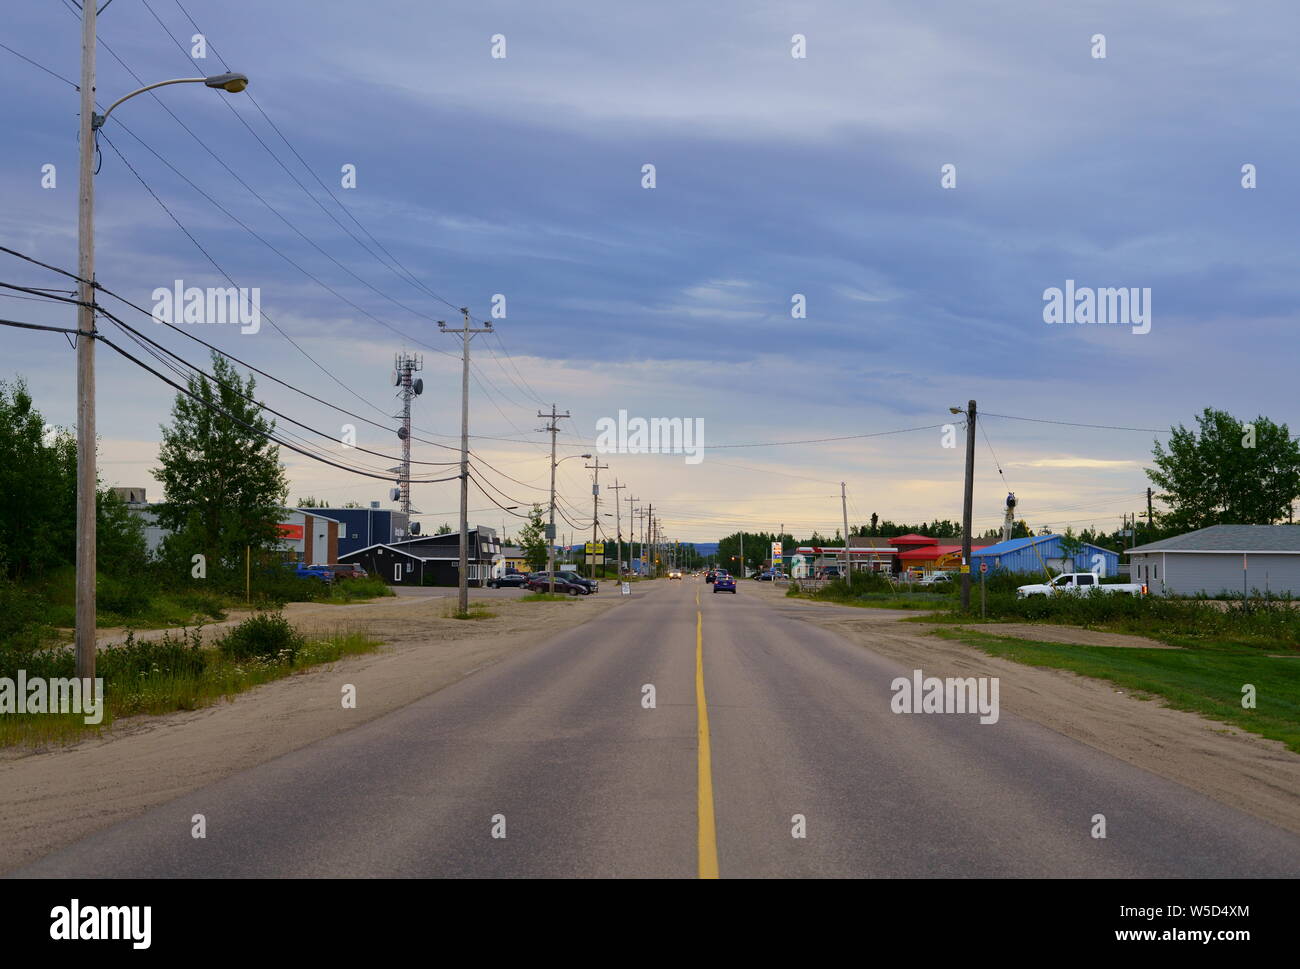 Hamilton River Road in Happy Valley-Goose Bay, province of Newfoundland and Labrador, Canada. Street scenery in summer, during sunset. Stock Photo